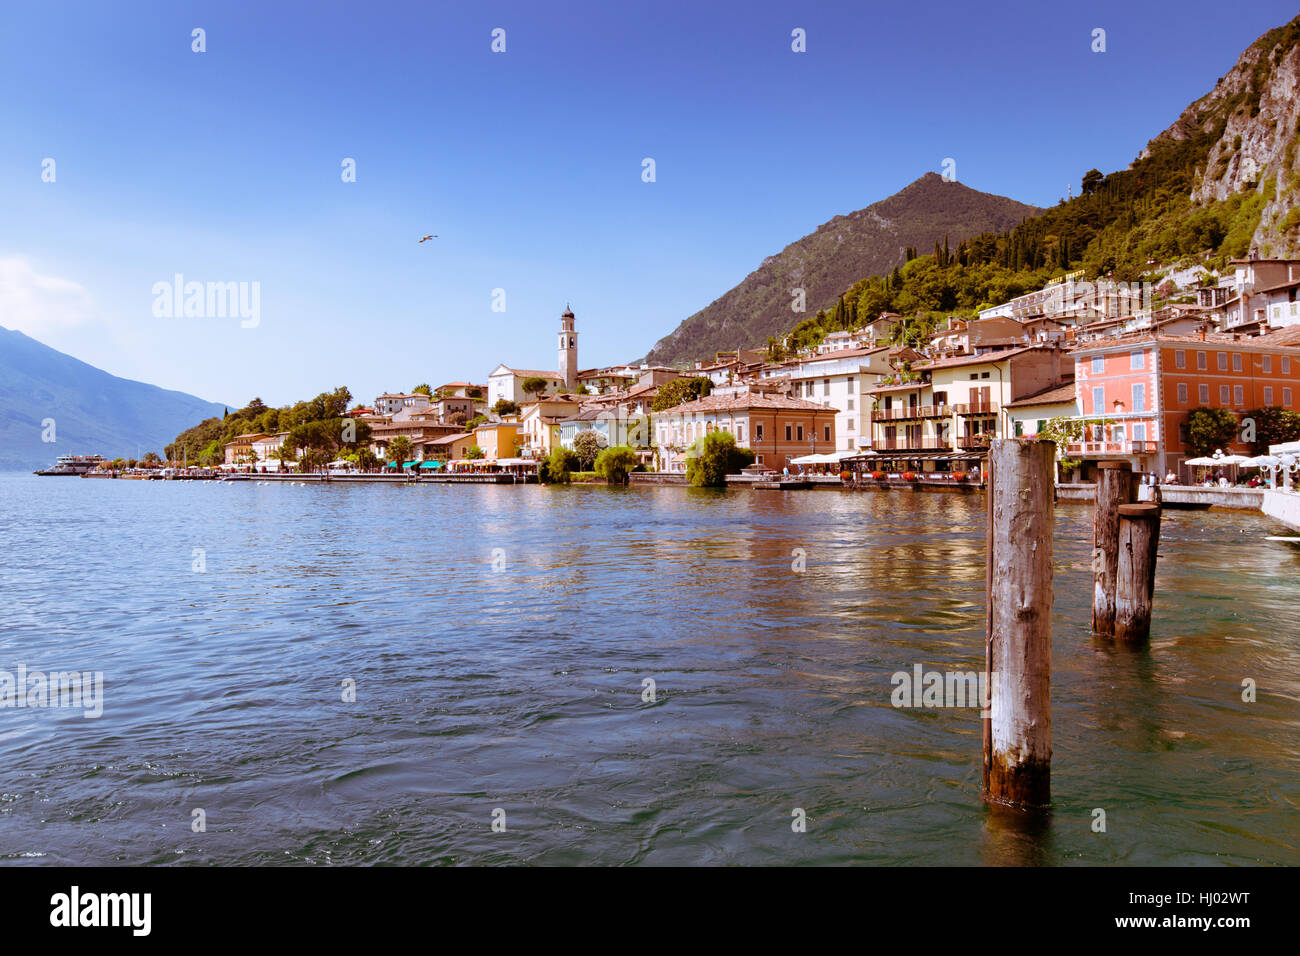 Limone sul Garda is a town in Lombardy (northern Italy), on the shore of Lake Garda. Stock Photo